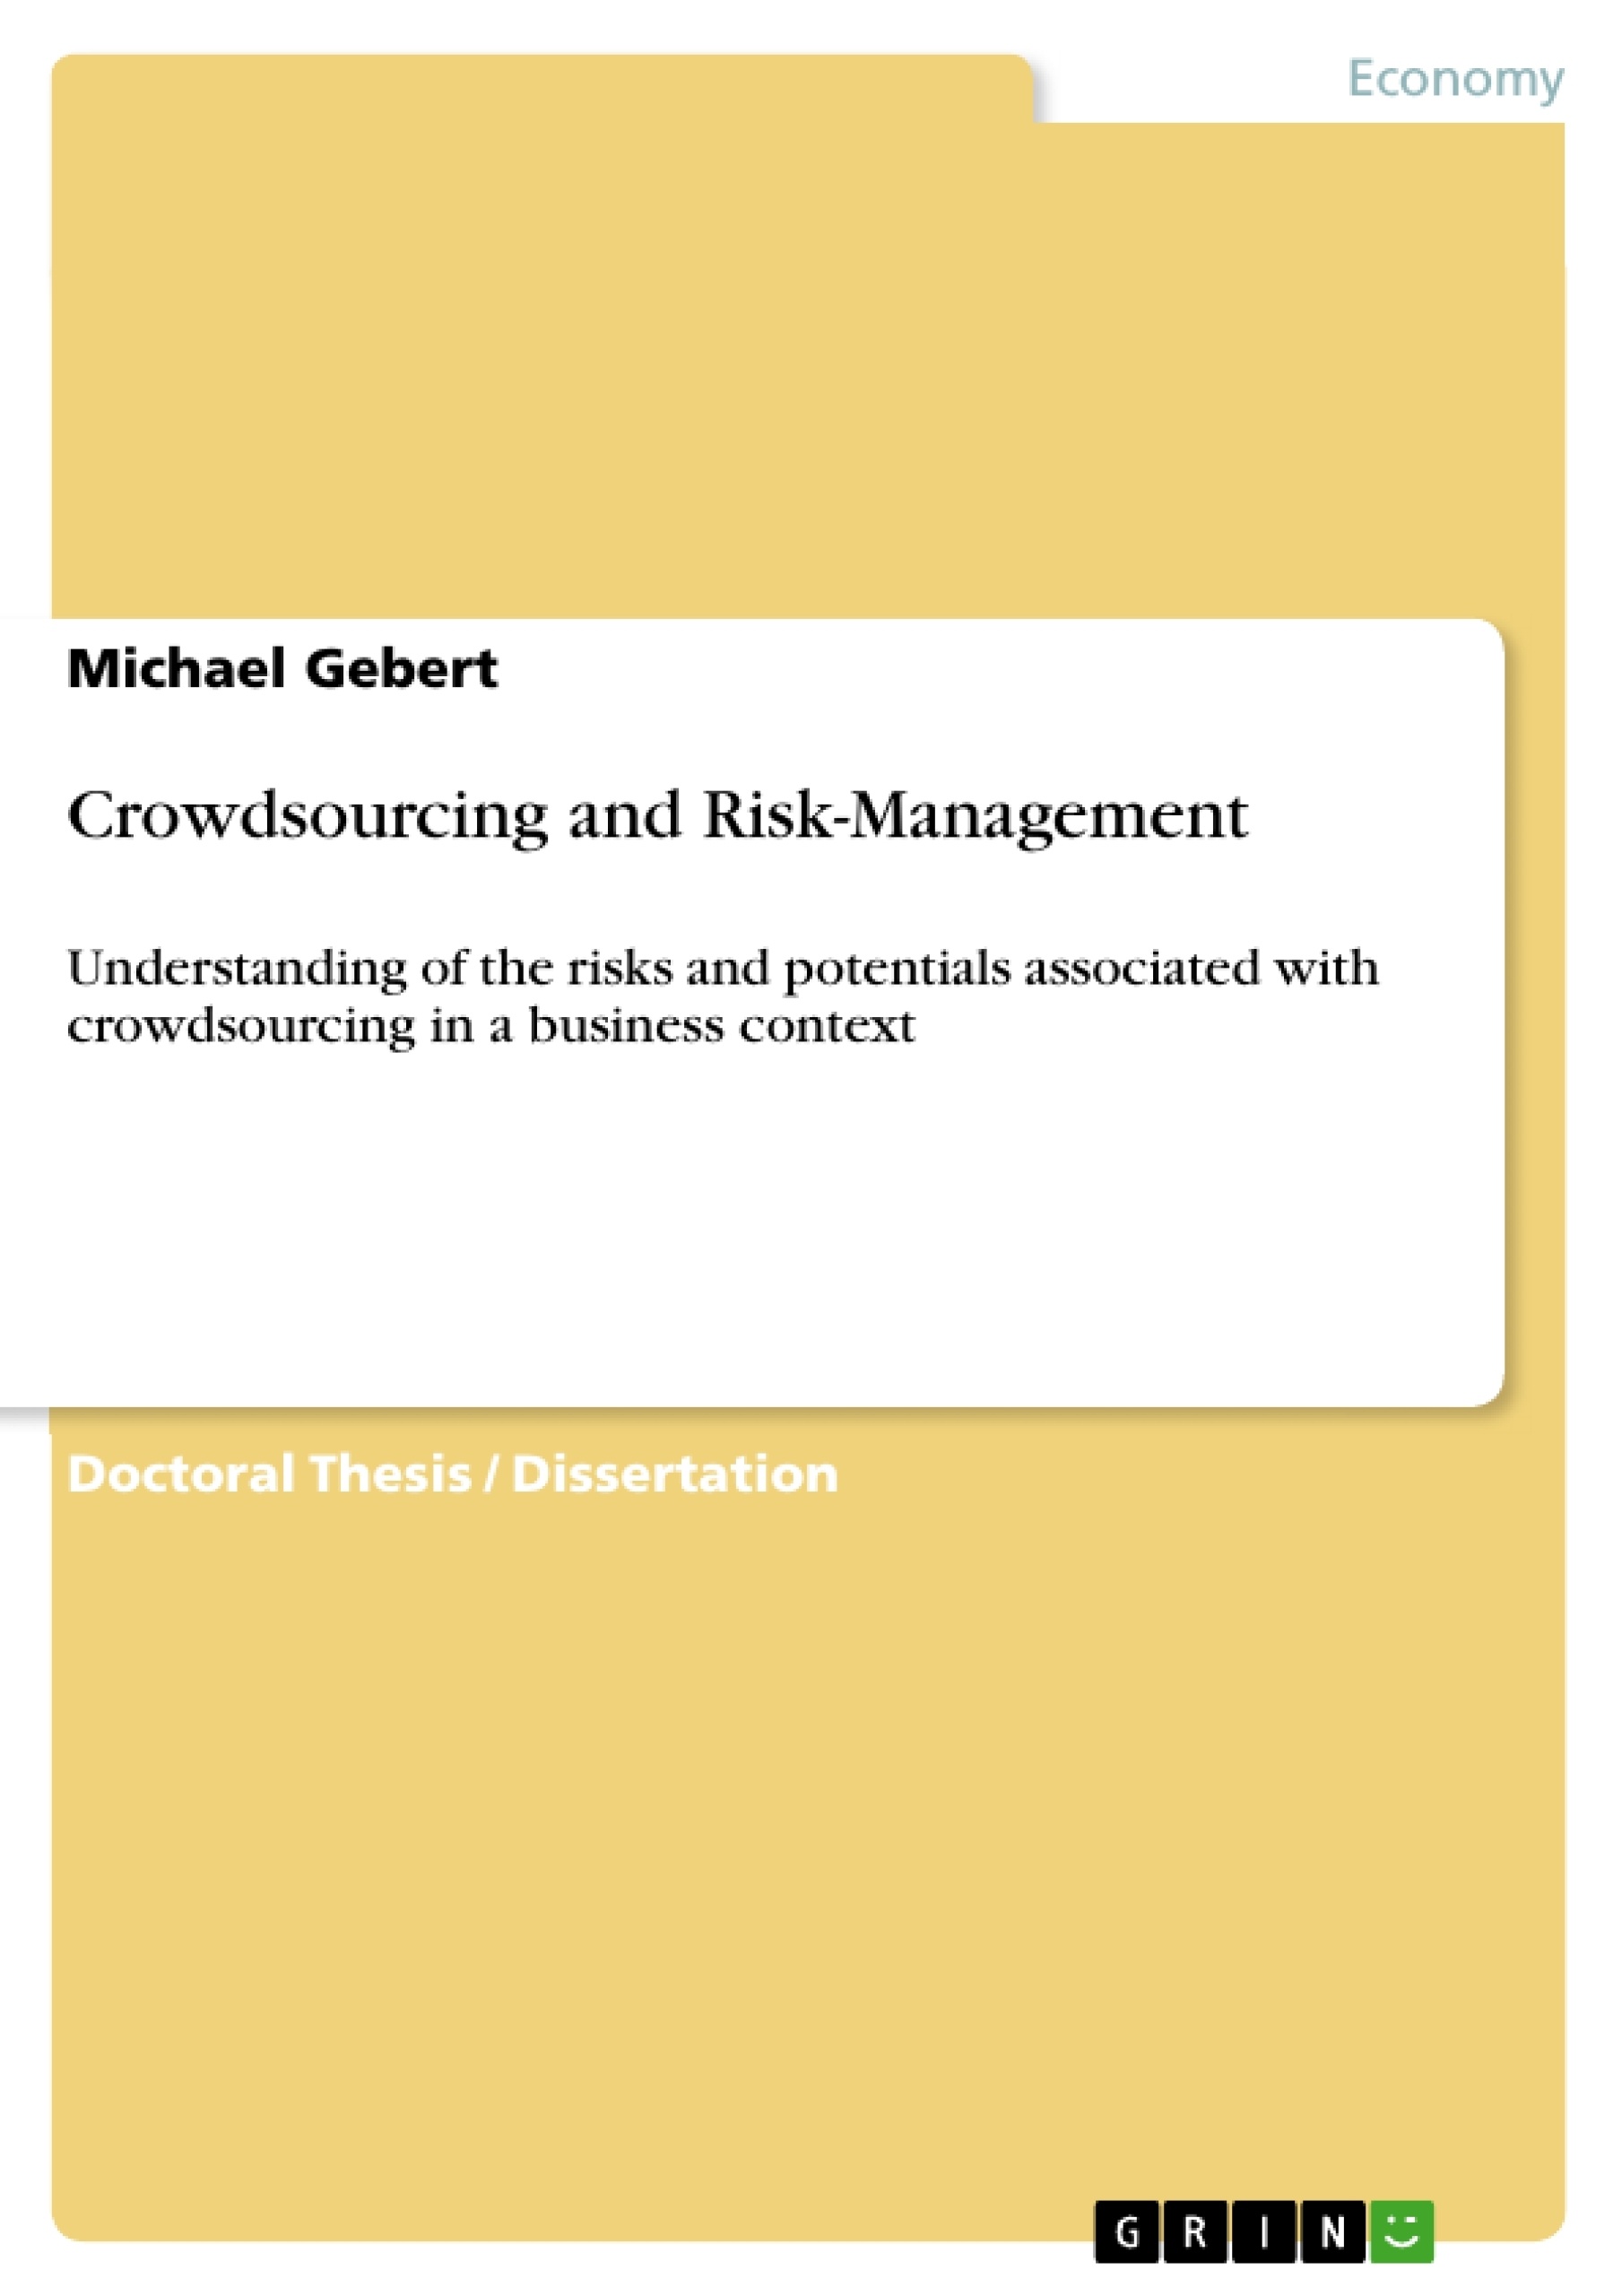 Title: Crowdsourcing and Risk-Management